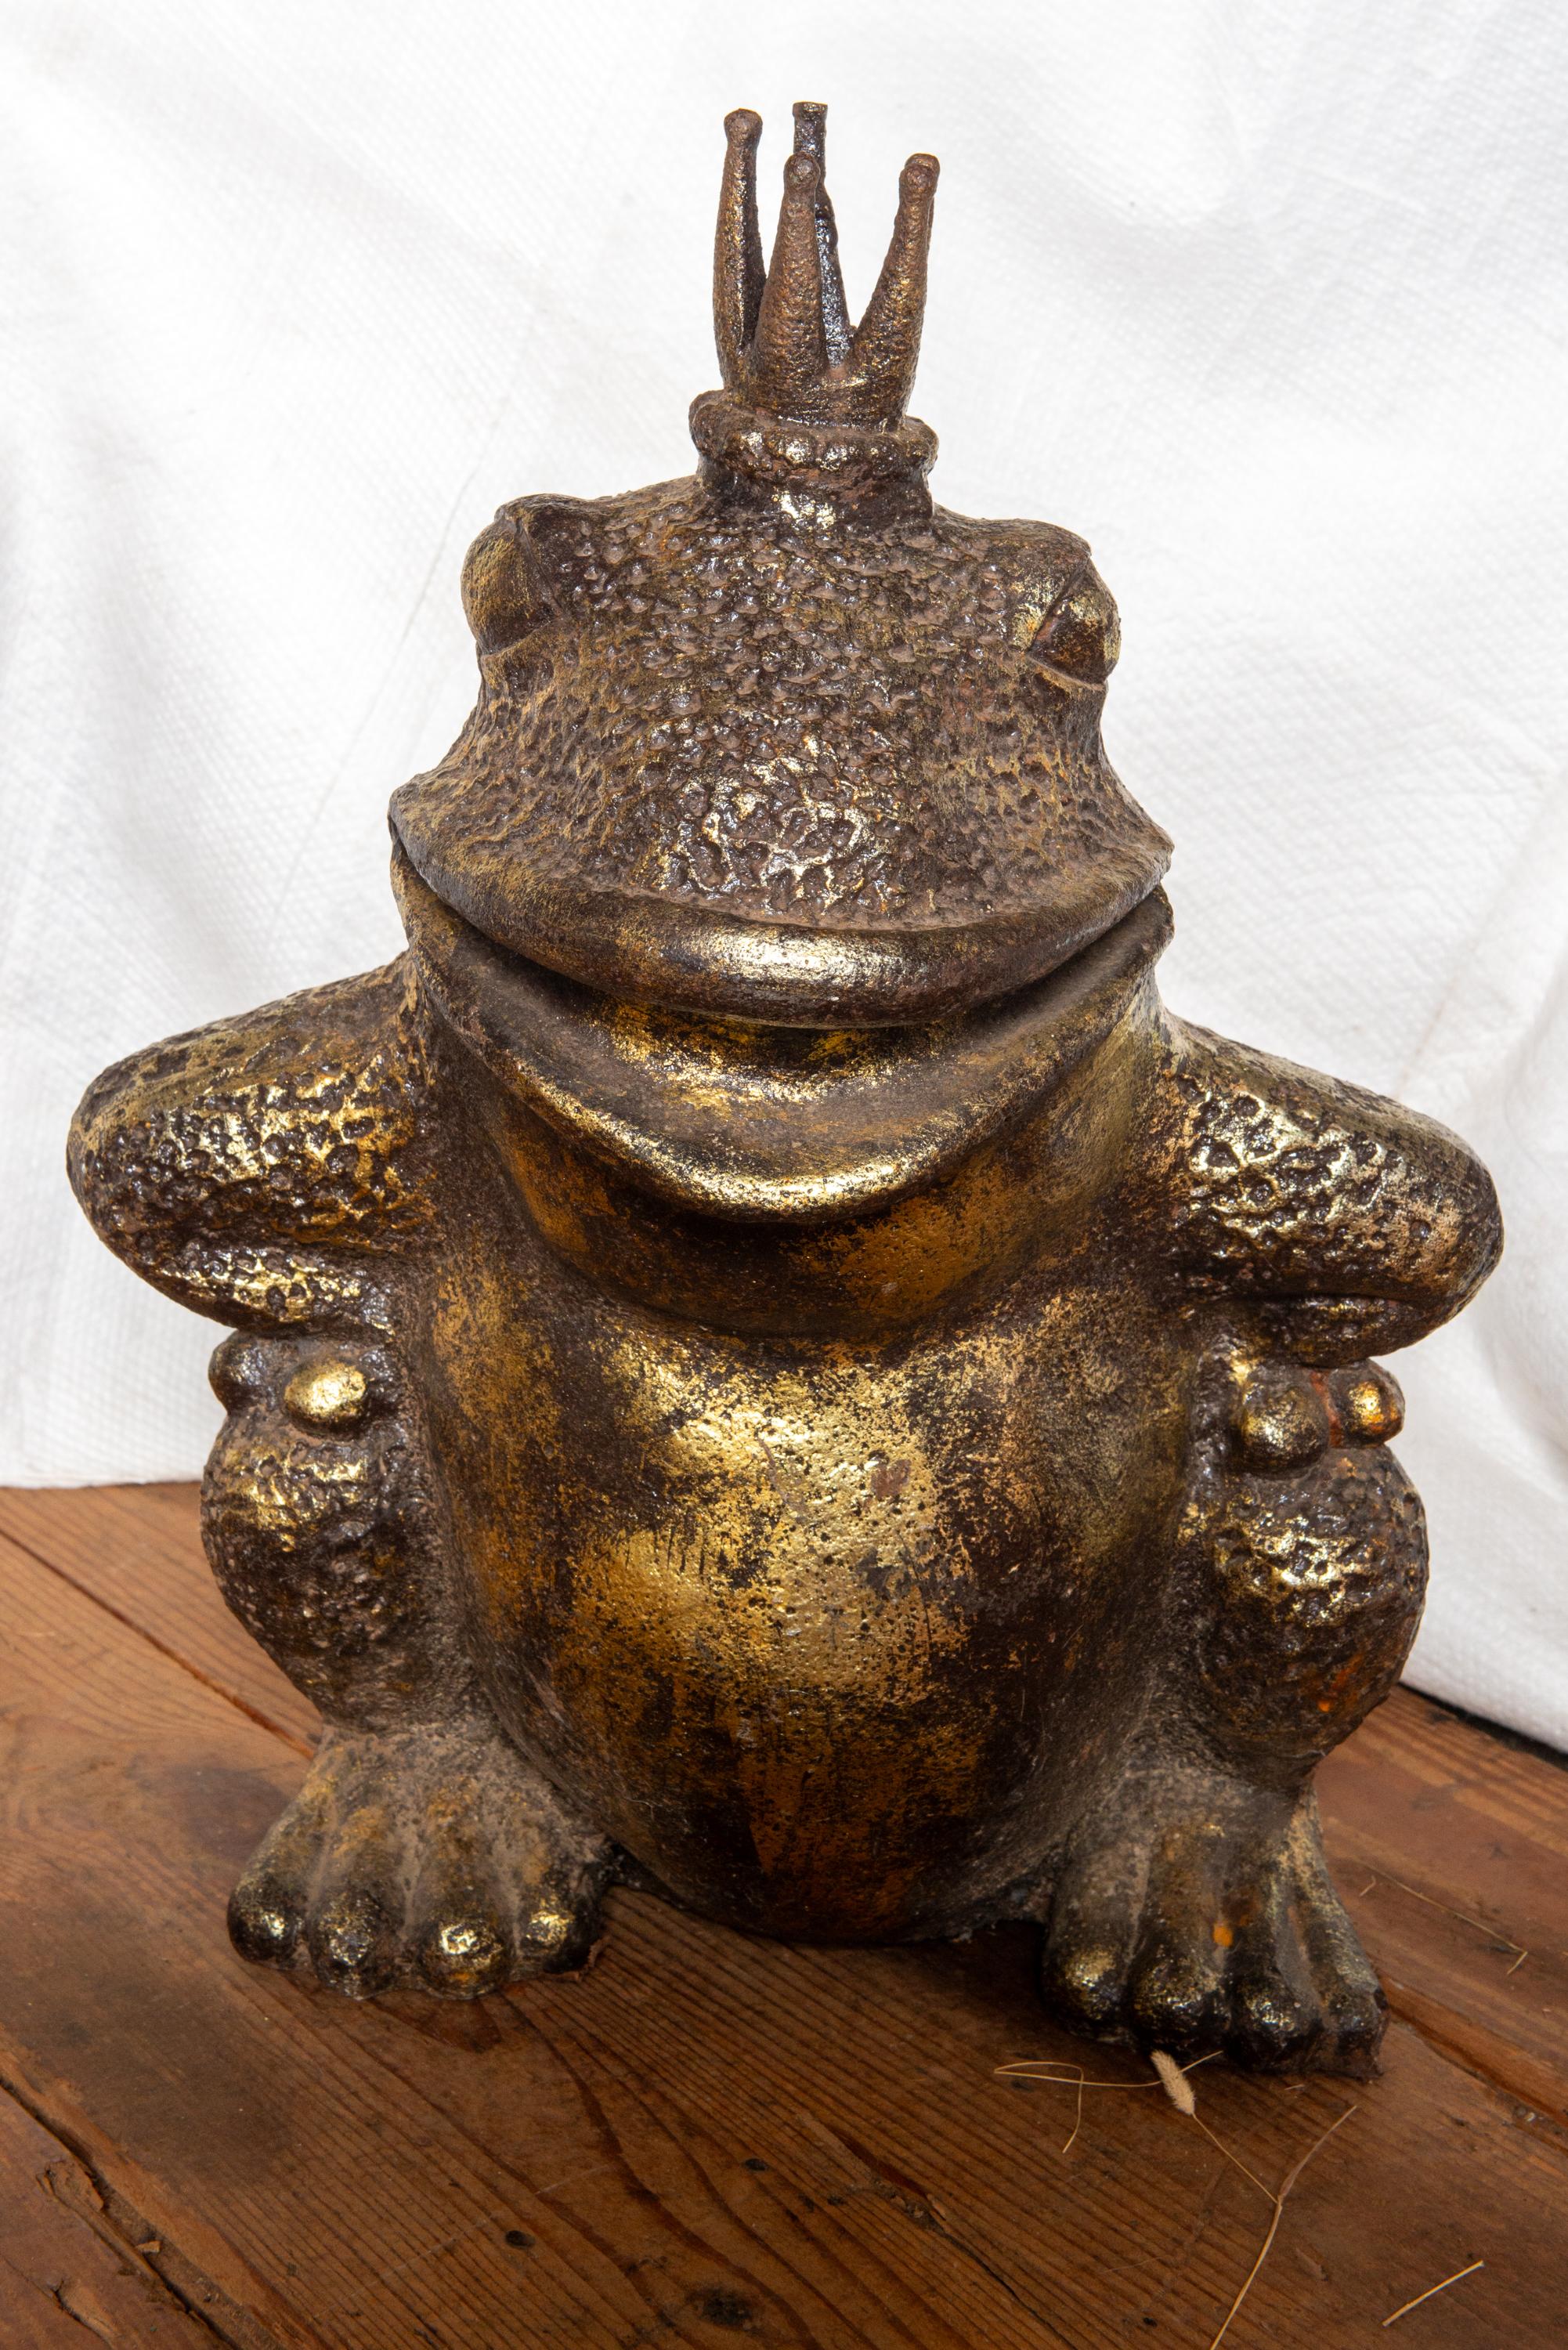 A fanciful gilt cast stone frog prince. He is croaching on his hind legs, wearing a crown and big smile. A fun addition to your garden or an indoor companion.